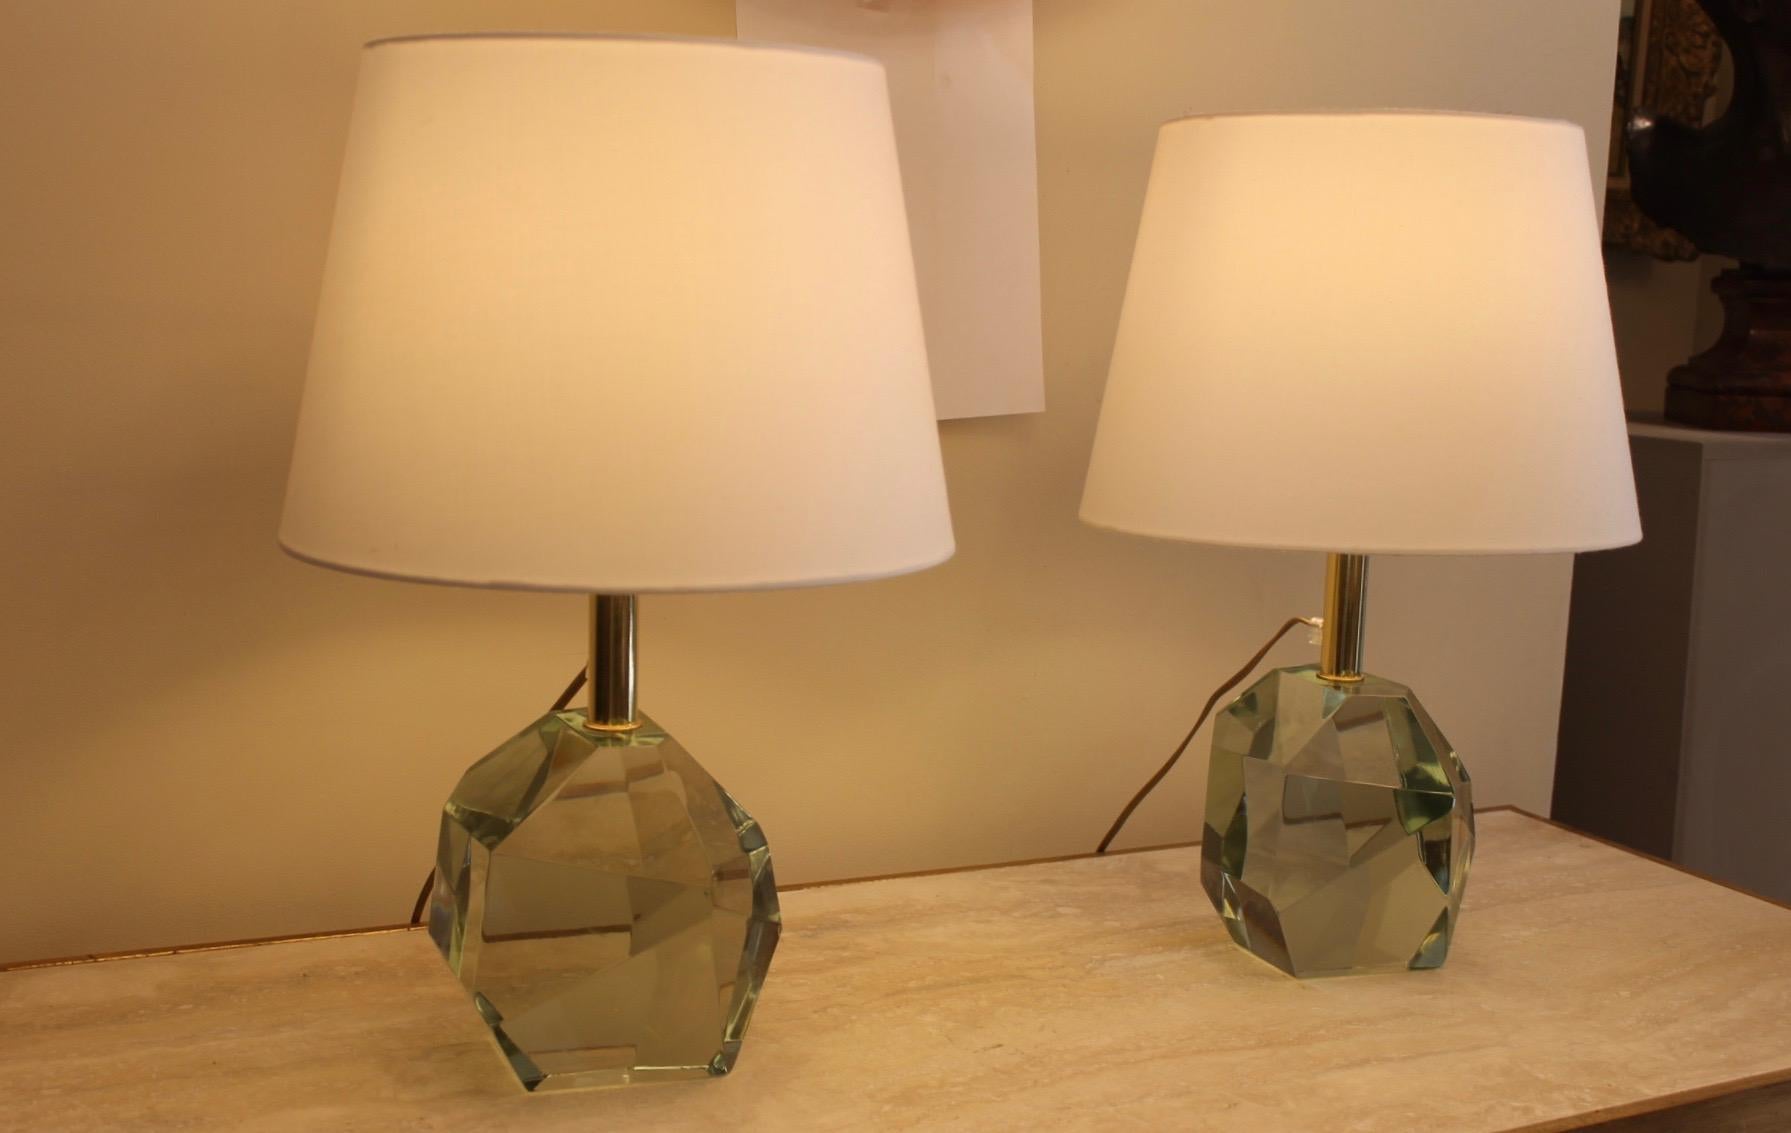 Pair of Lamps, Murano Glass, Pebbles, 20th For Sale 4